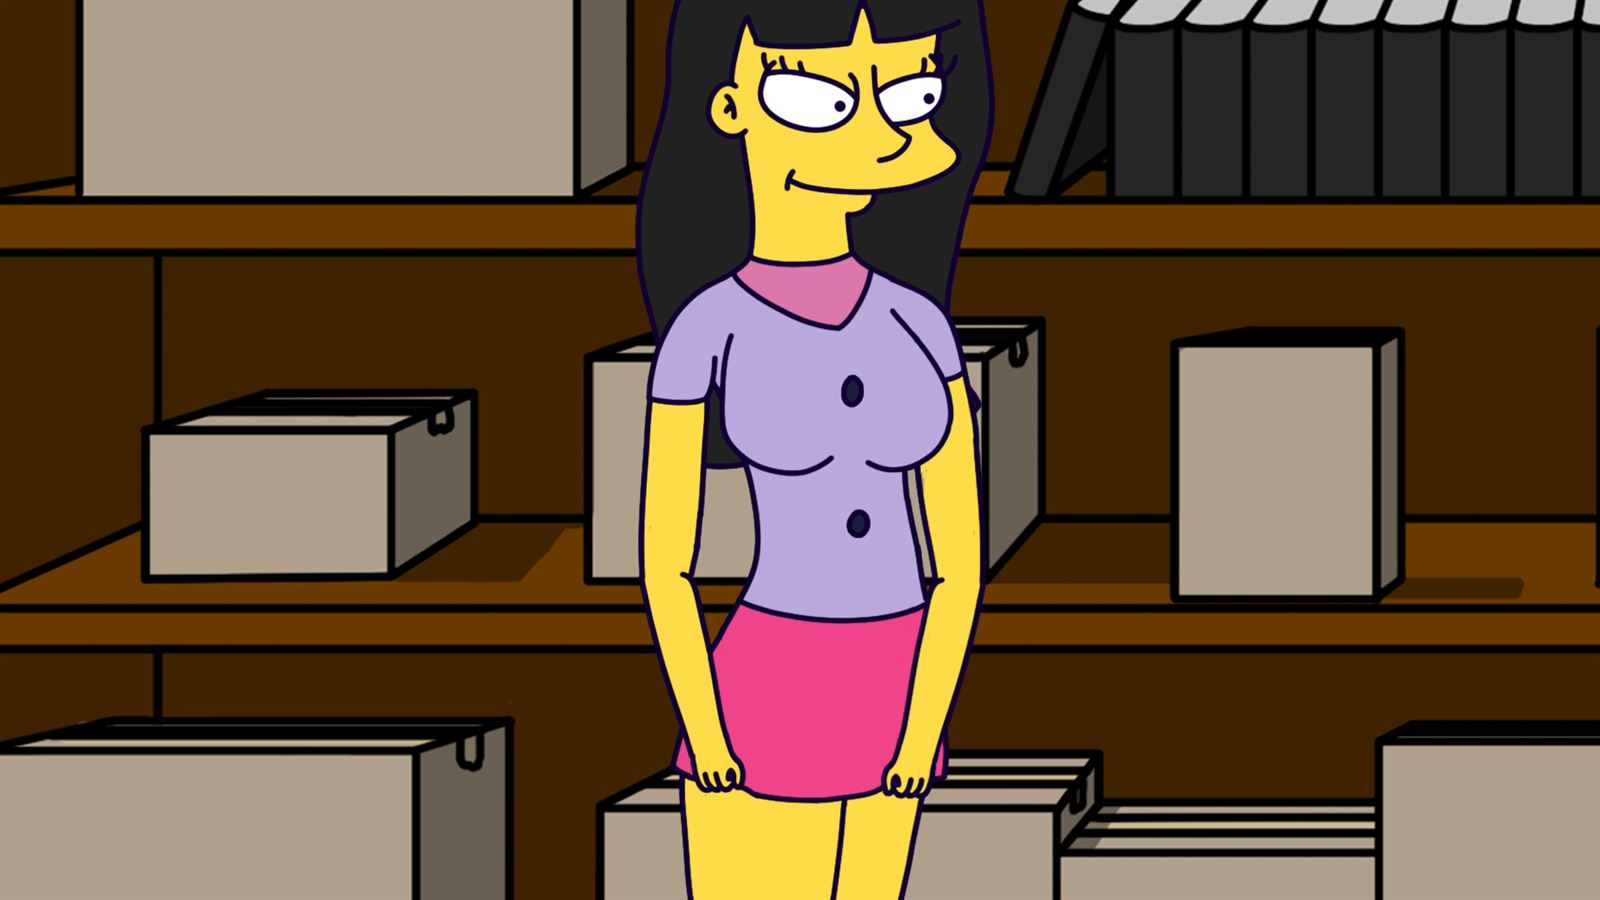 Xxxdownload Apps 18 Pals - Ren'py] The Simpsons Simpvill - v1.03 by Squizzy 18+ Adult xxx Porn Game  Download